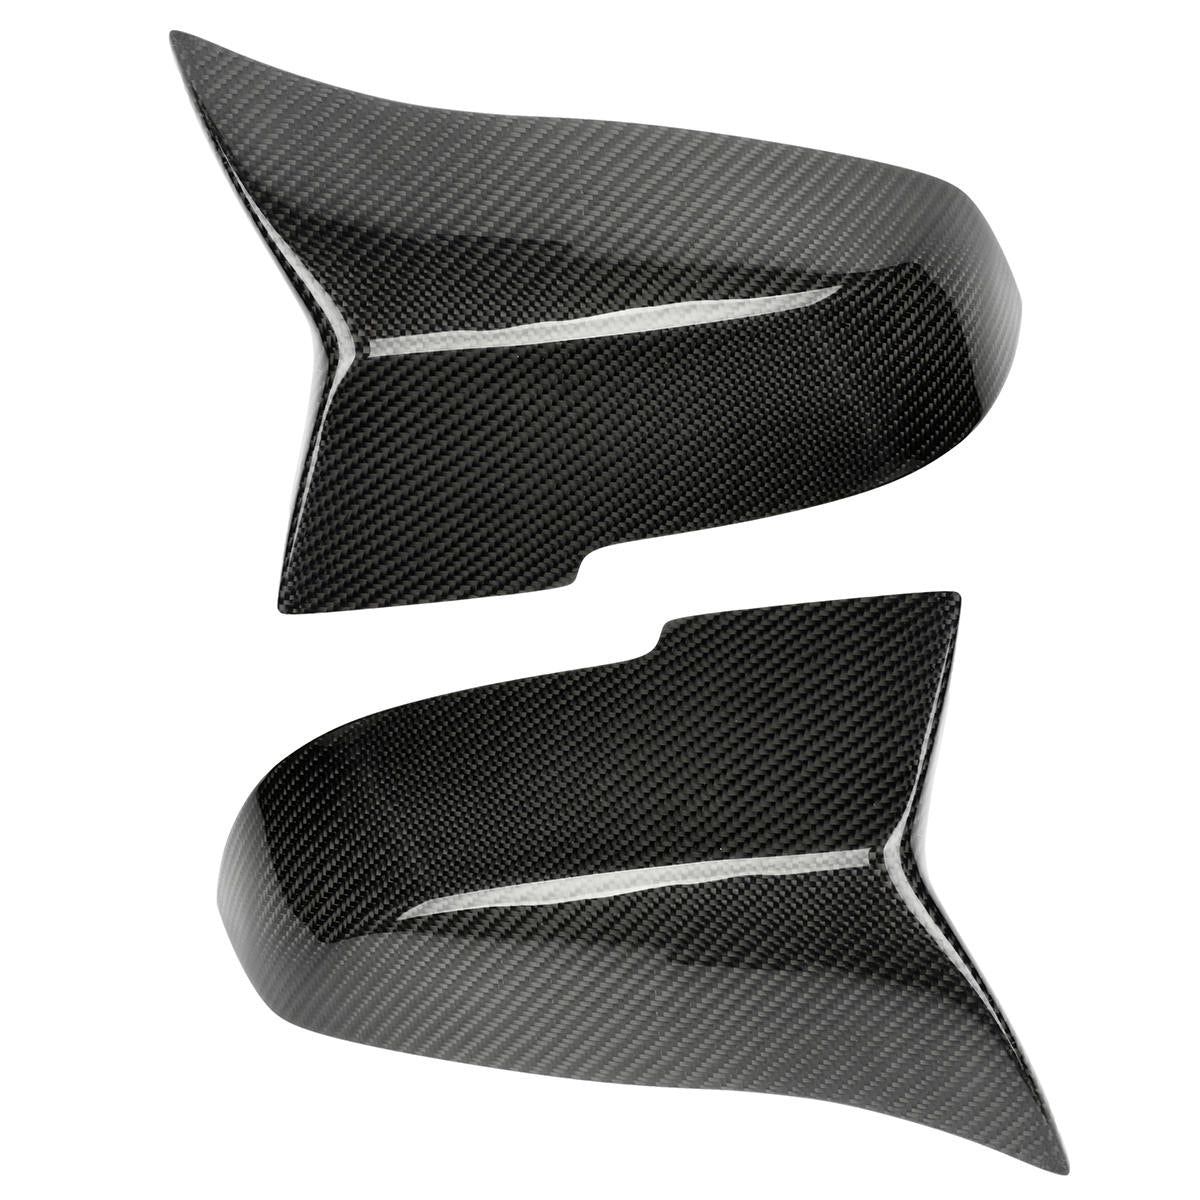 BMW F30 M4 MIRROR COVERS CARBON DIPPED